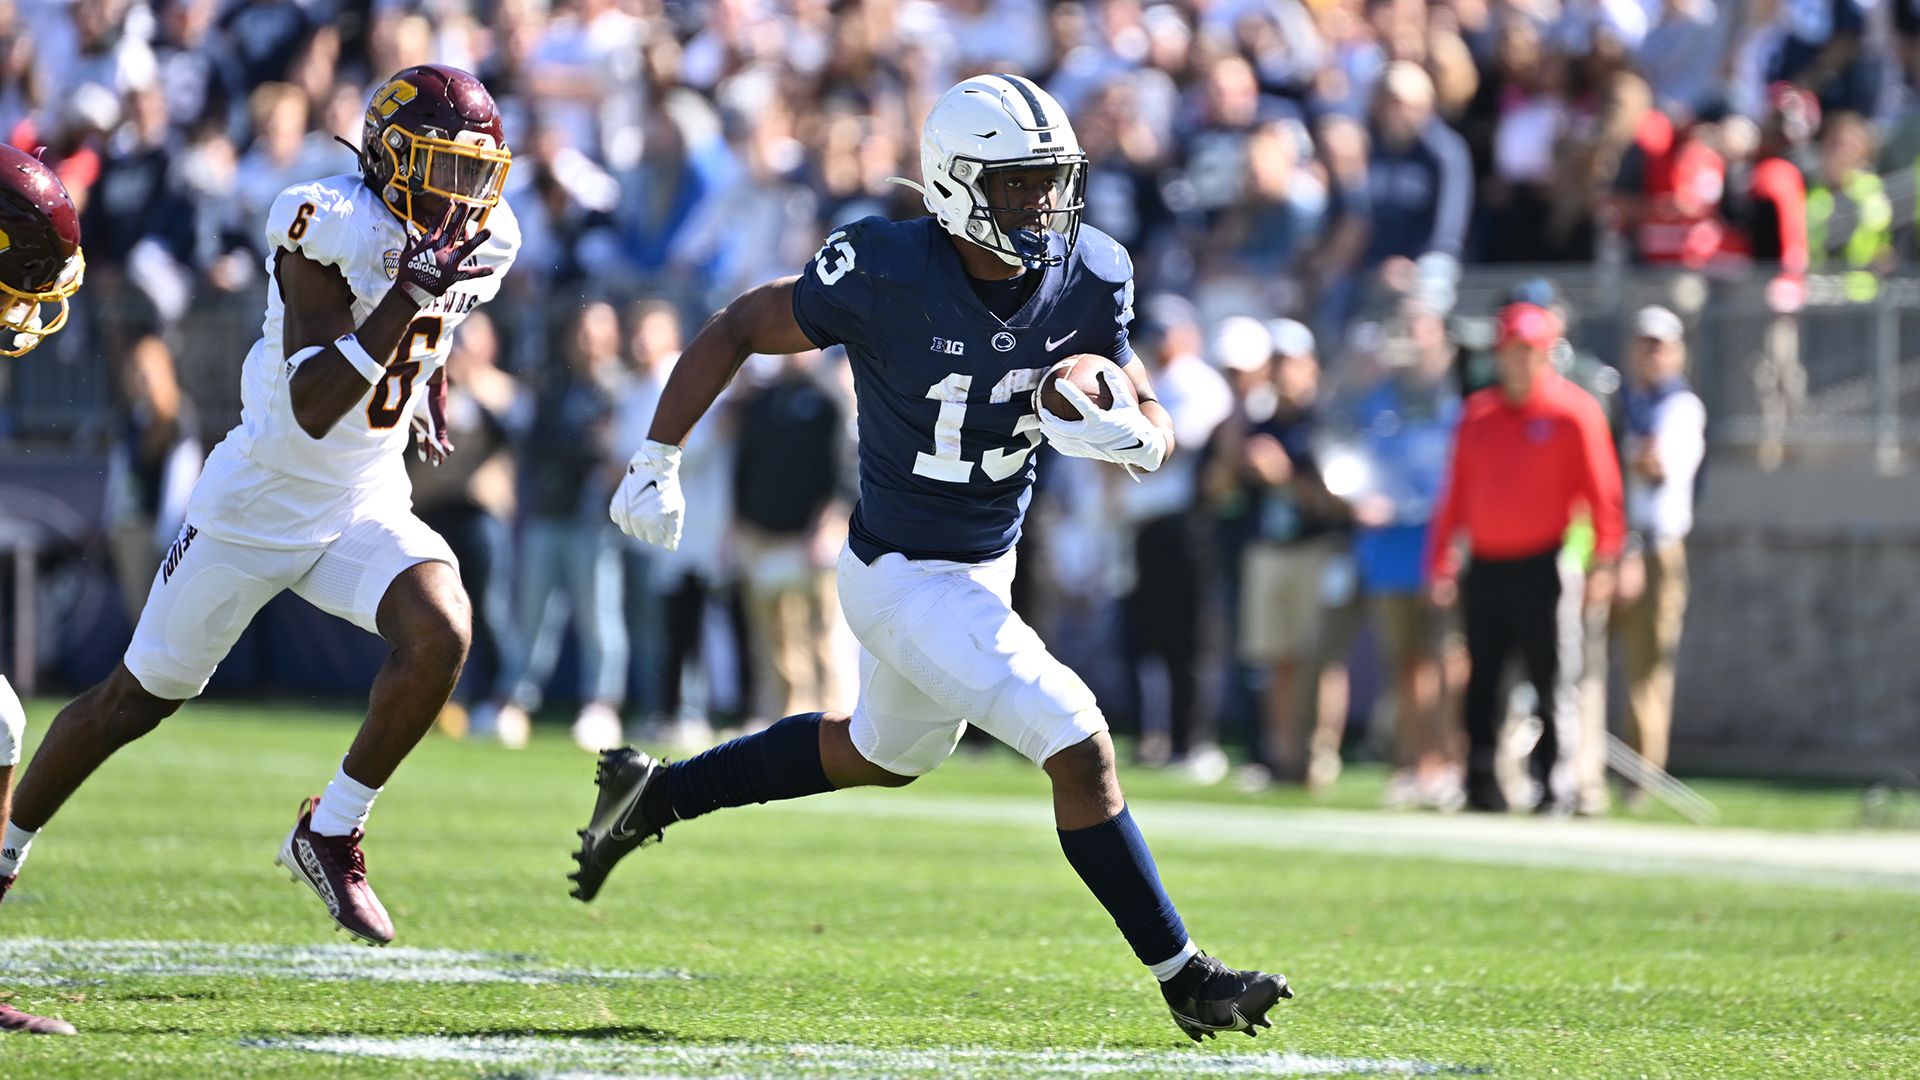 #14 Penn State Breezes Past Central Michigan For 4-0 Start